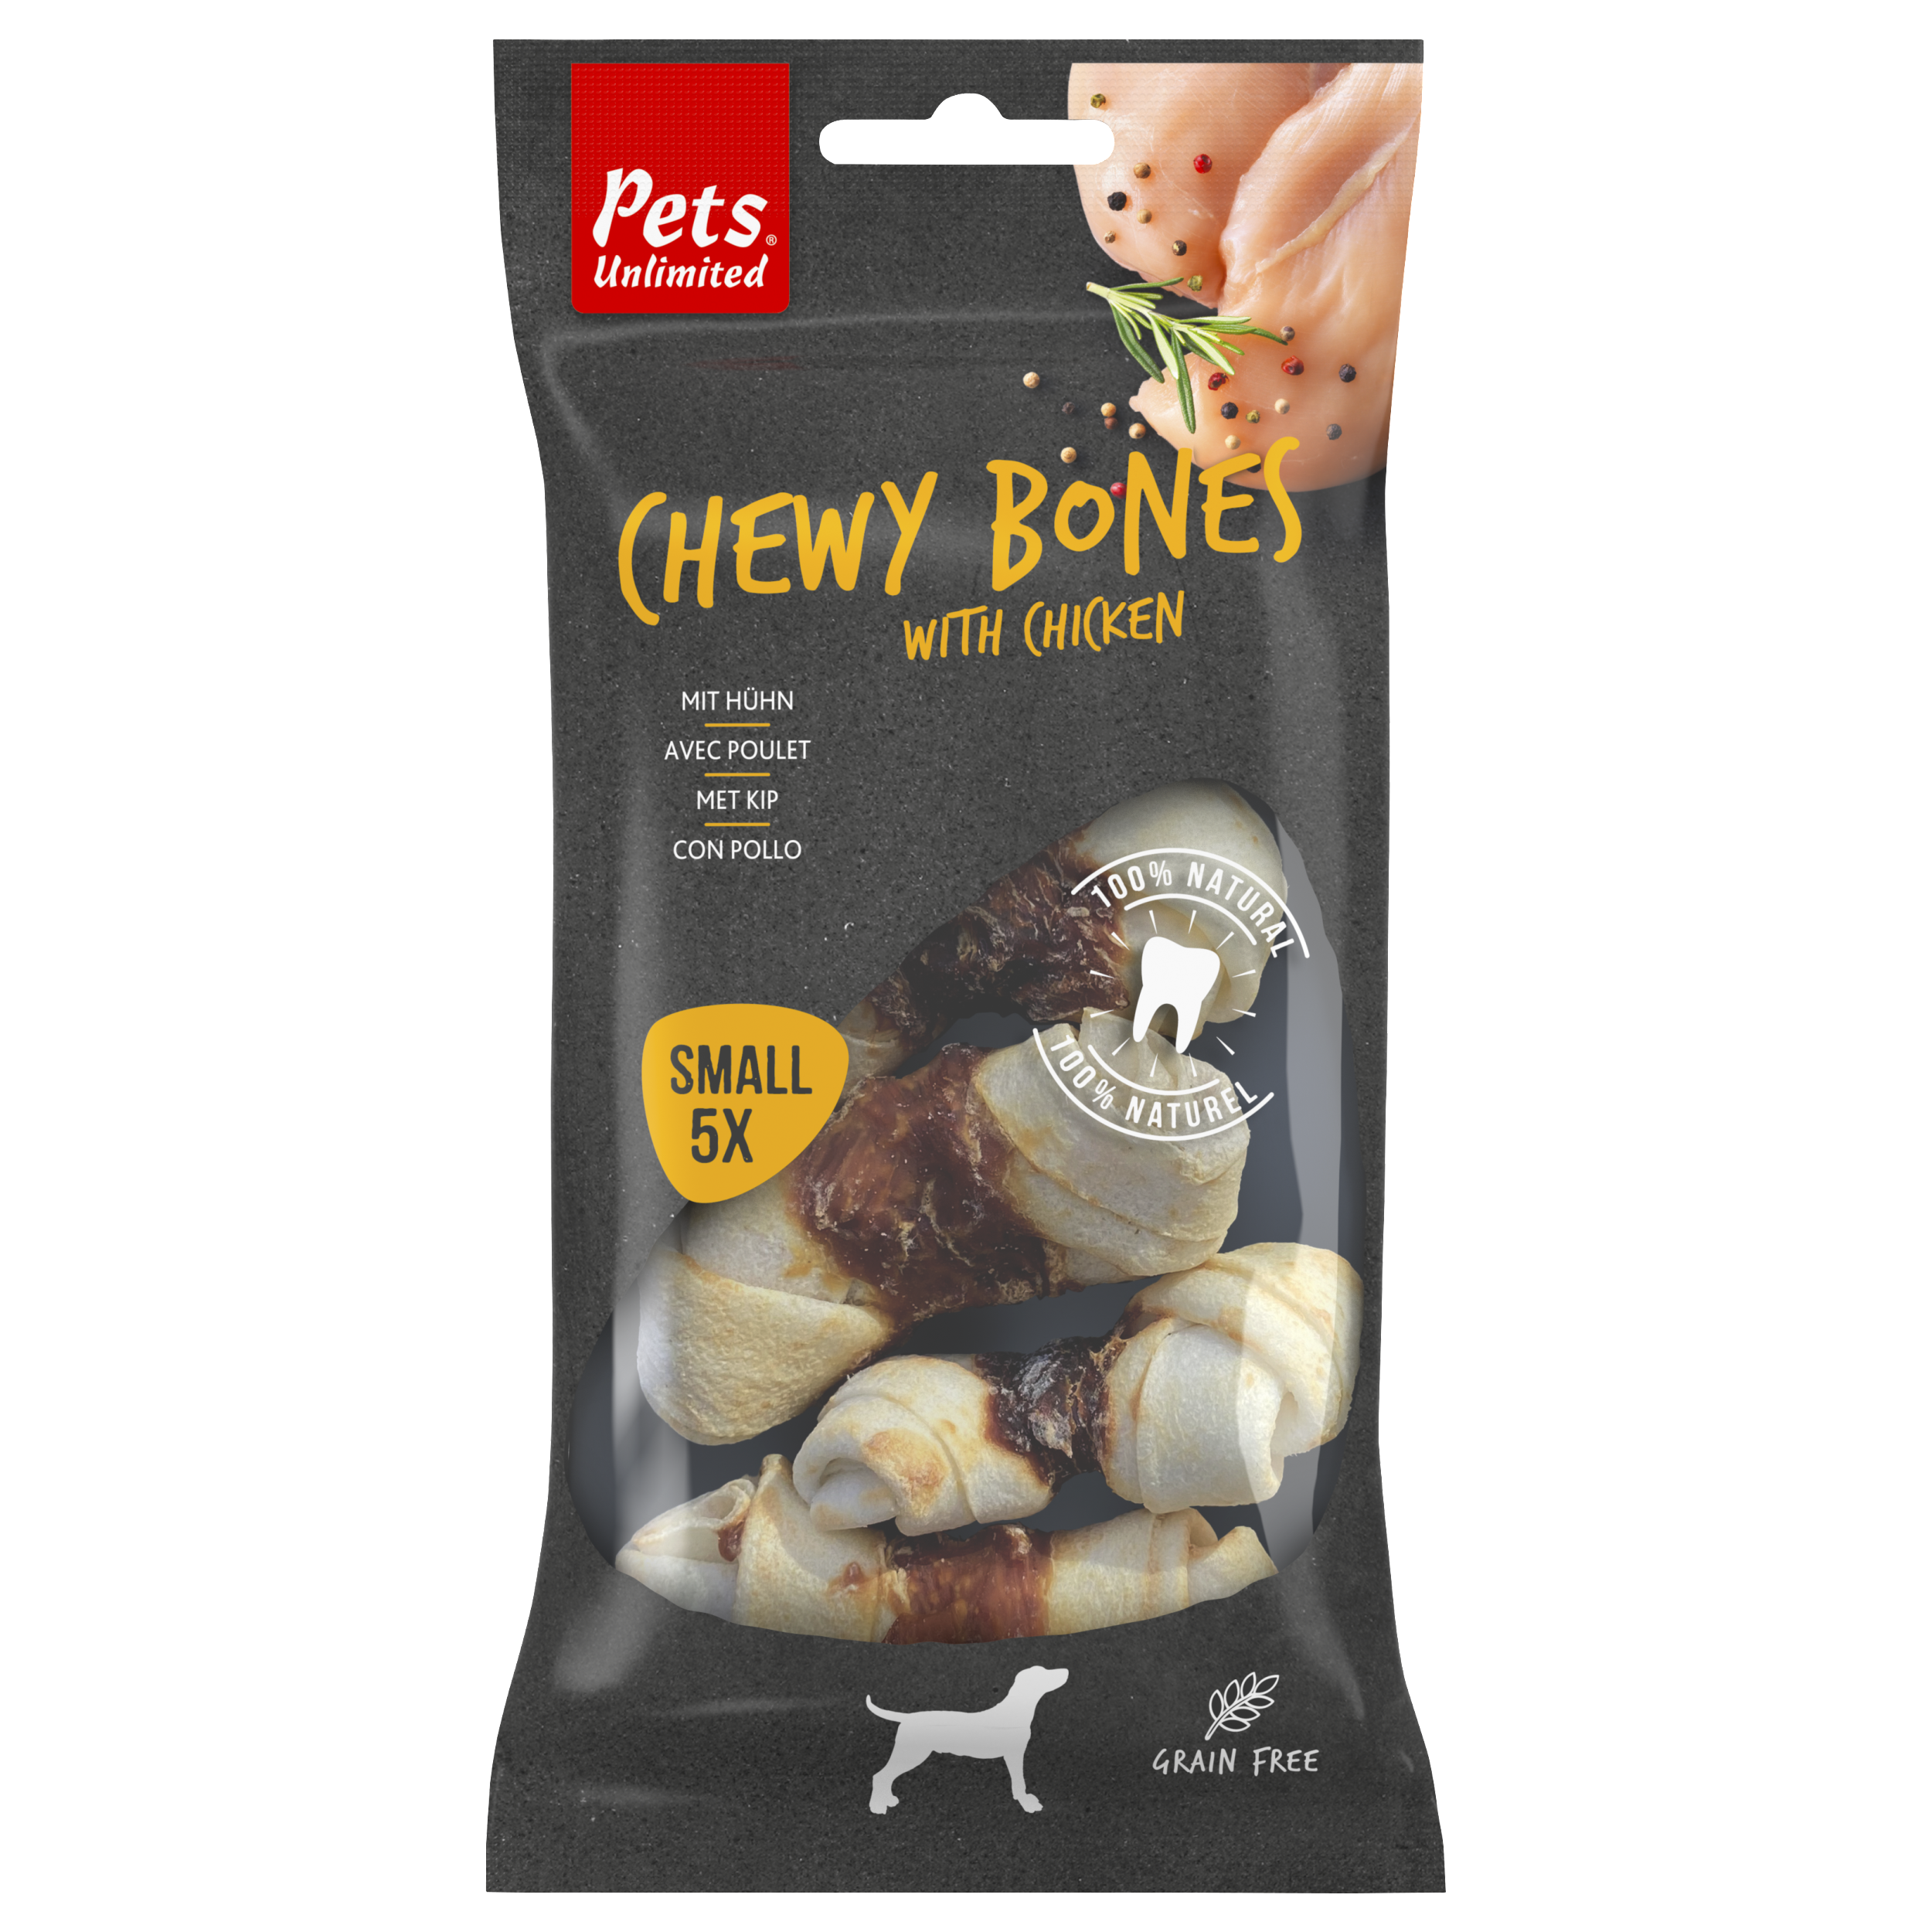 Chewy bones chicken small, 5 pieces